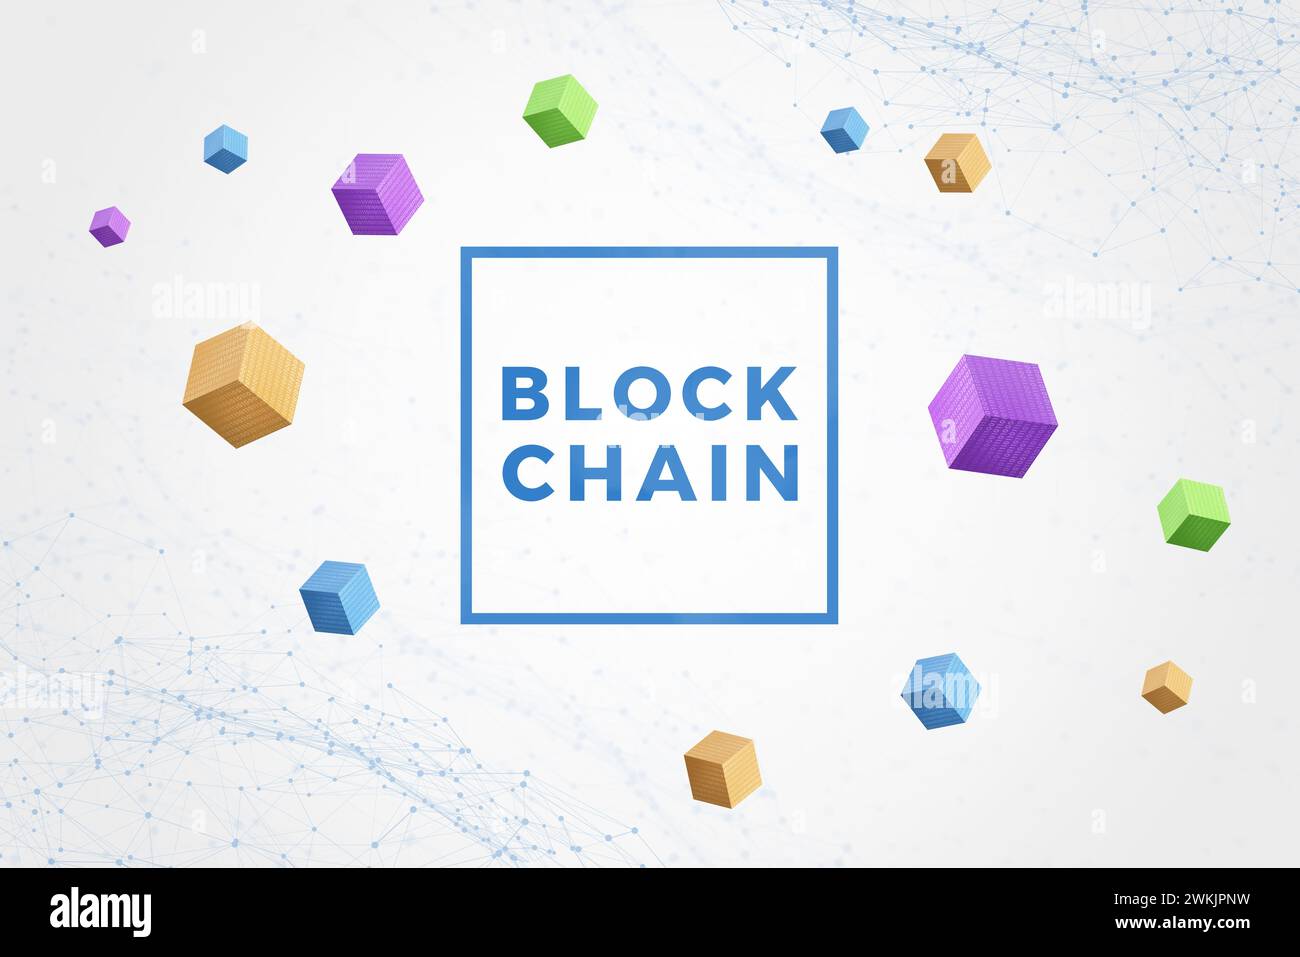 Blockchain text surrounded by blocks, cubes with binary code, and network nodes. Digital connectivity and security concept Stock Photo